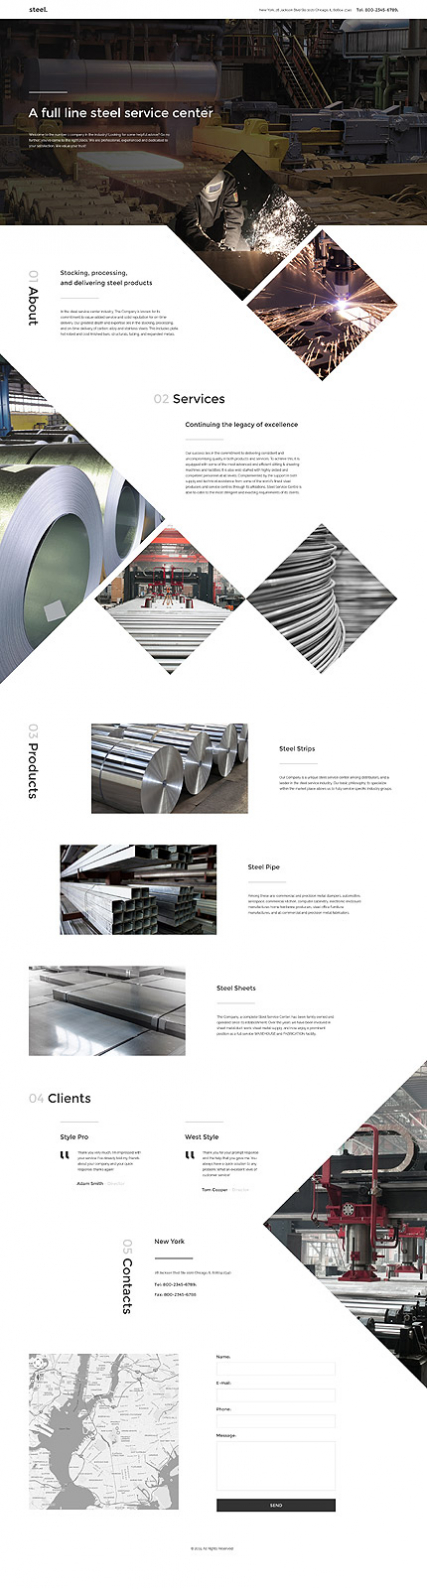 Steelworks Landing Page Template